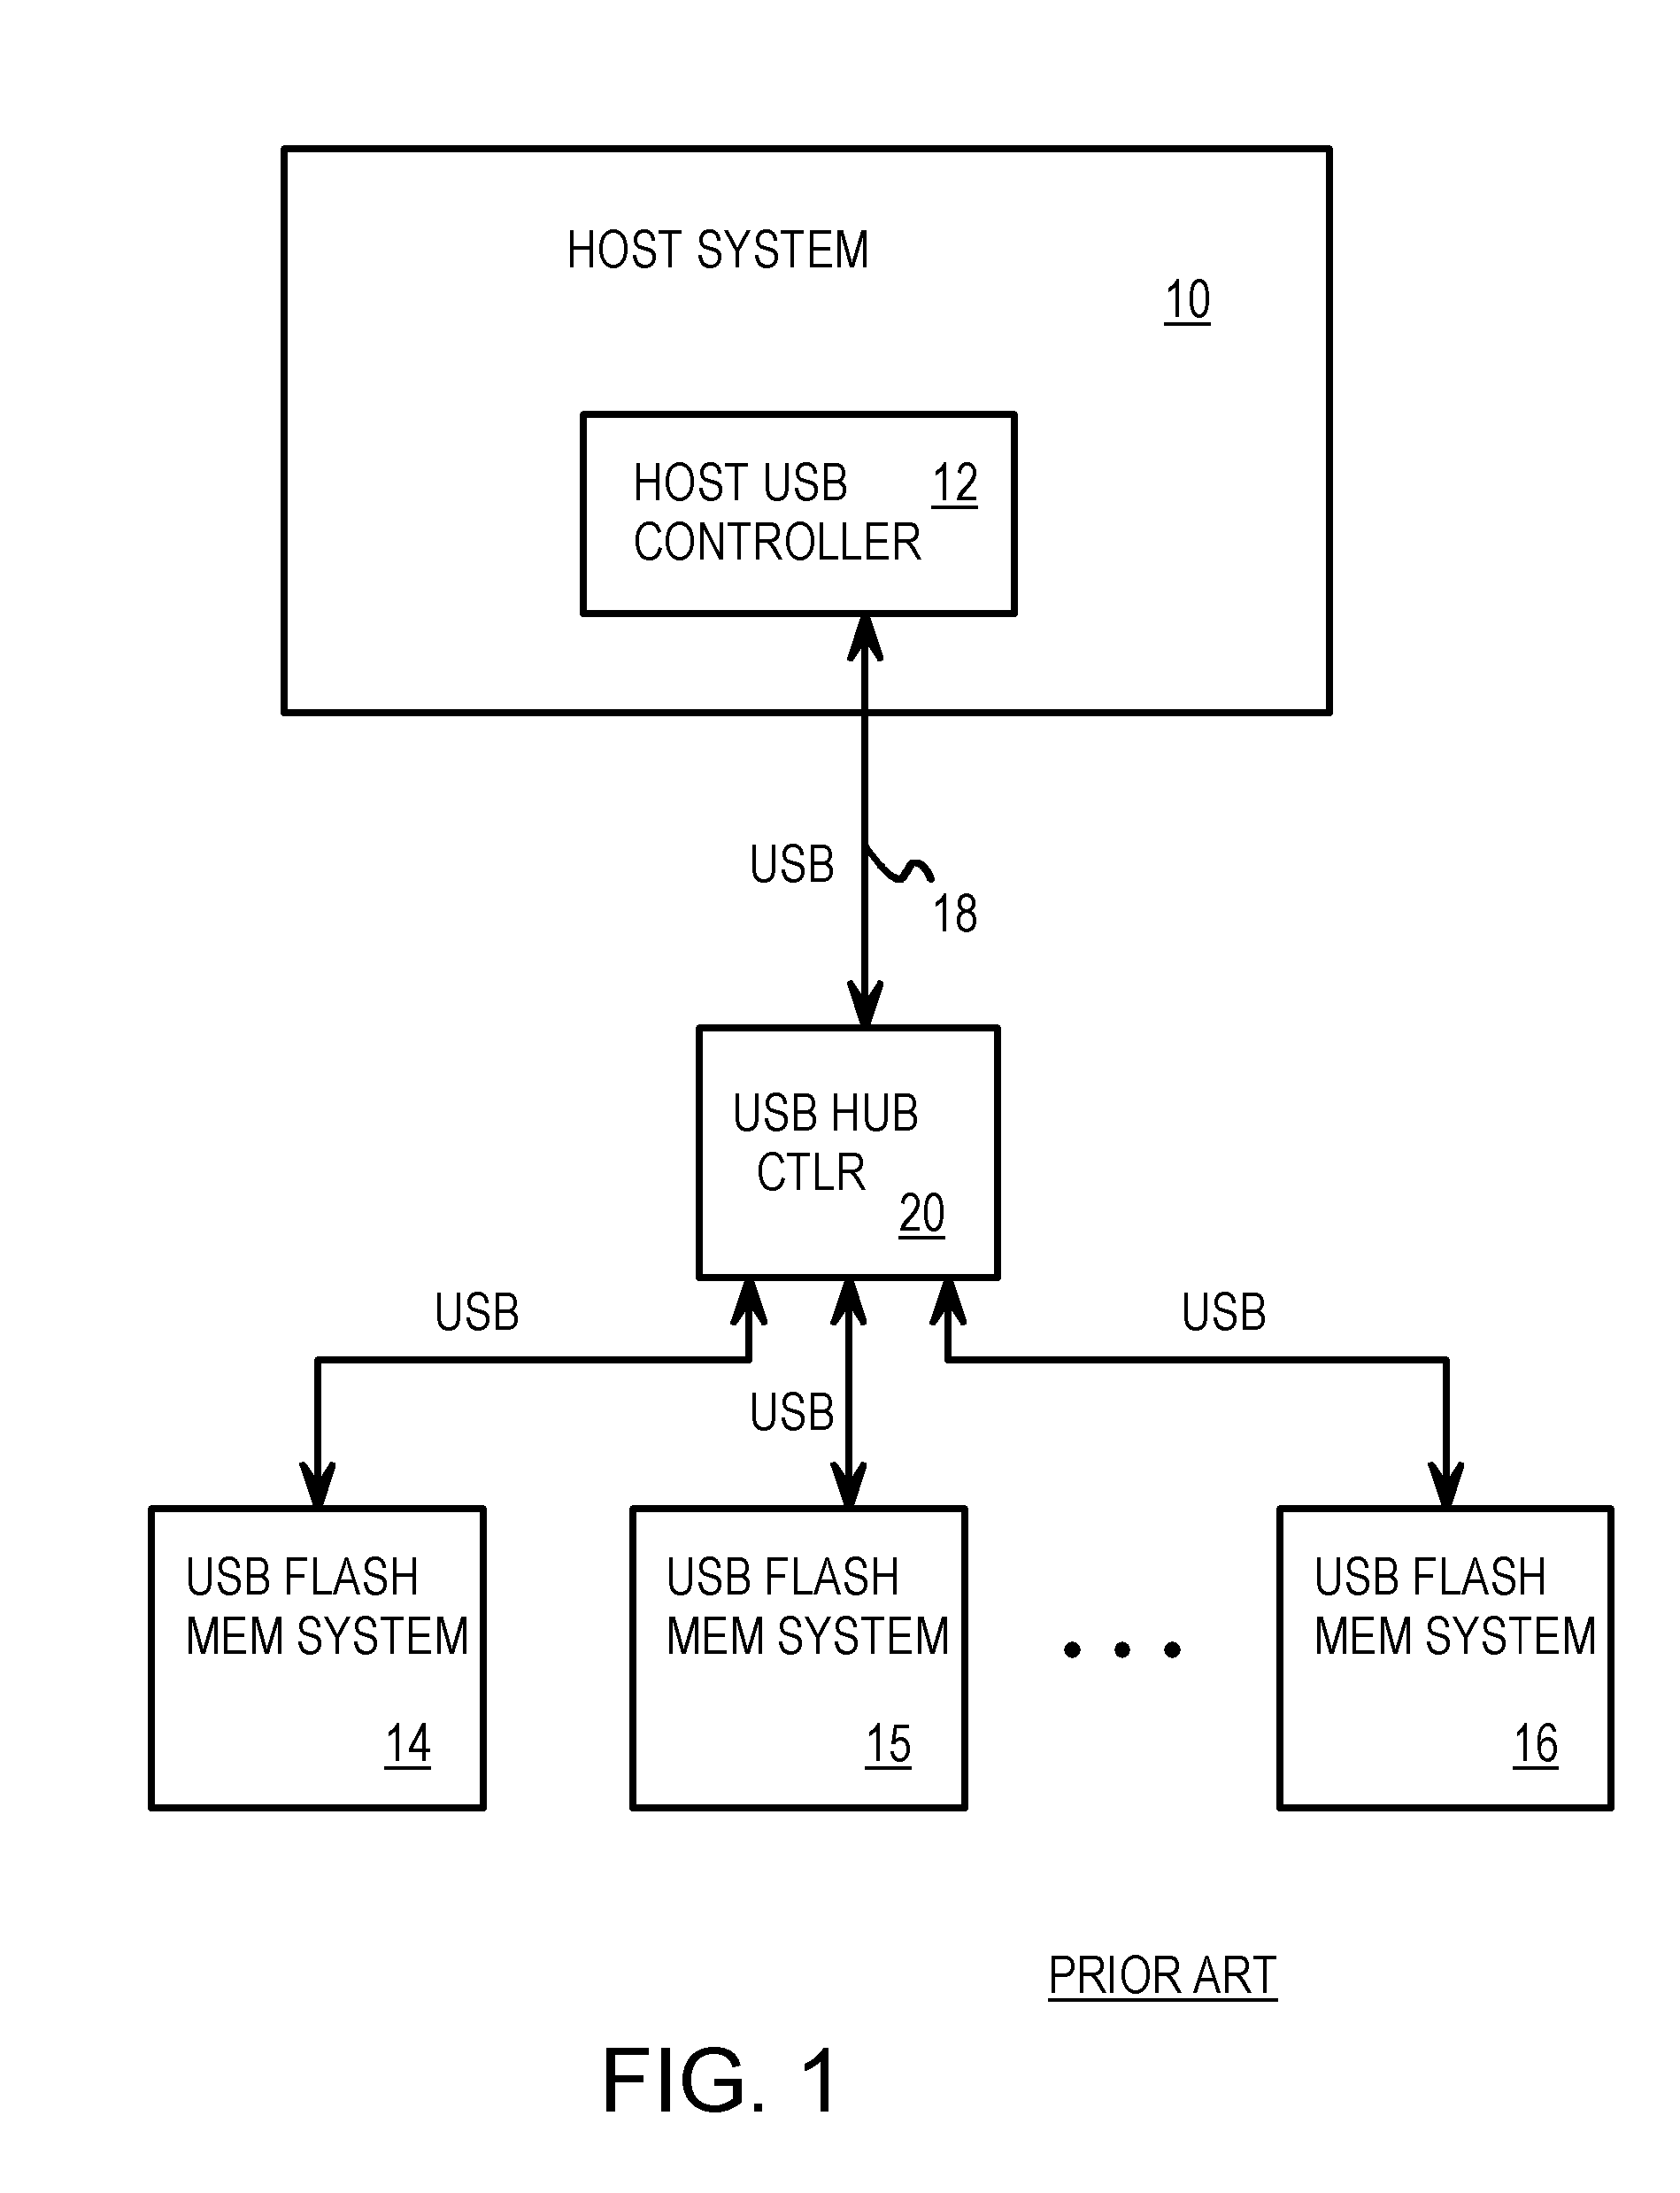 Single-Chip USB Controller Reading Power-On Boot Code from Integrated Flash Memory for User Storage